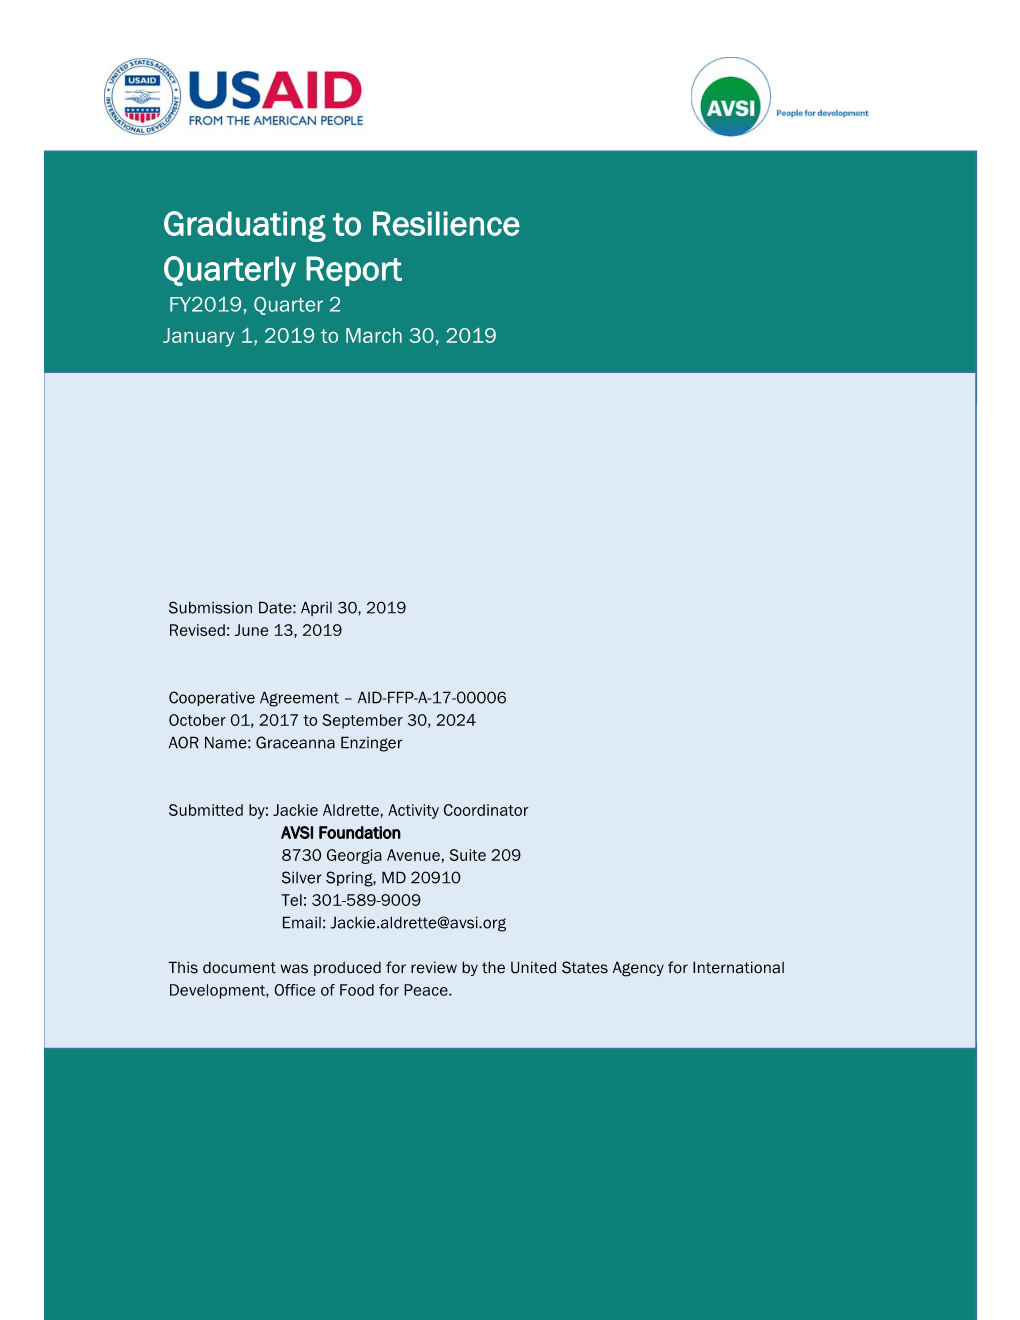 Graduating to Resilience Quarterly Report